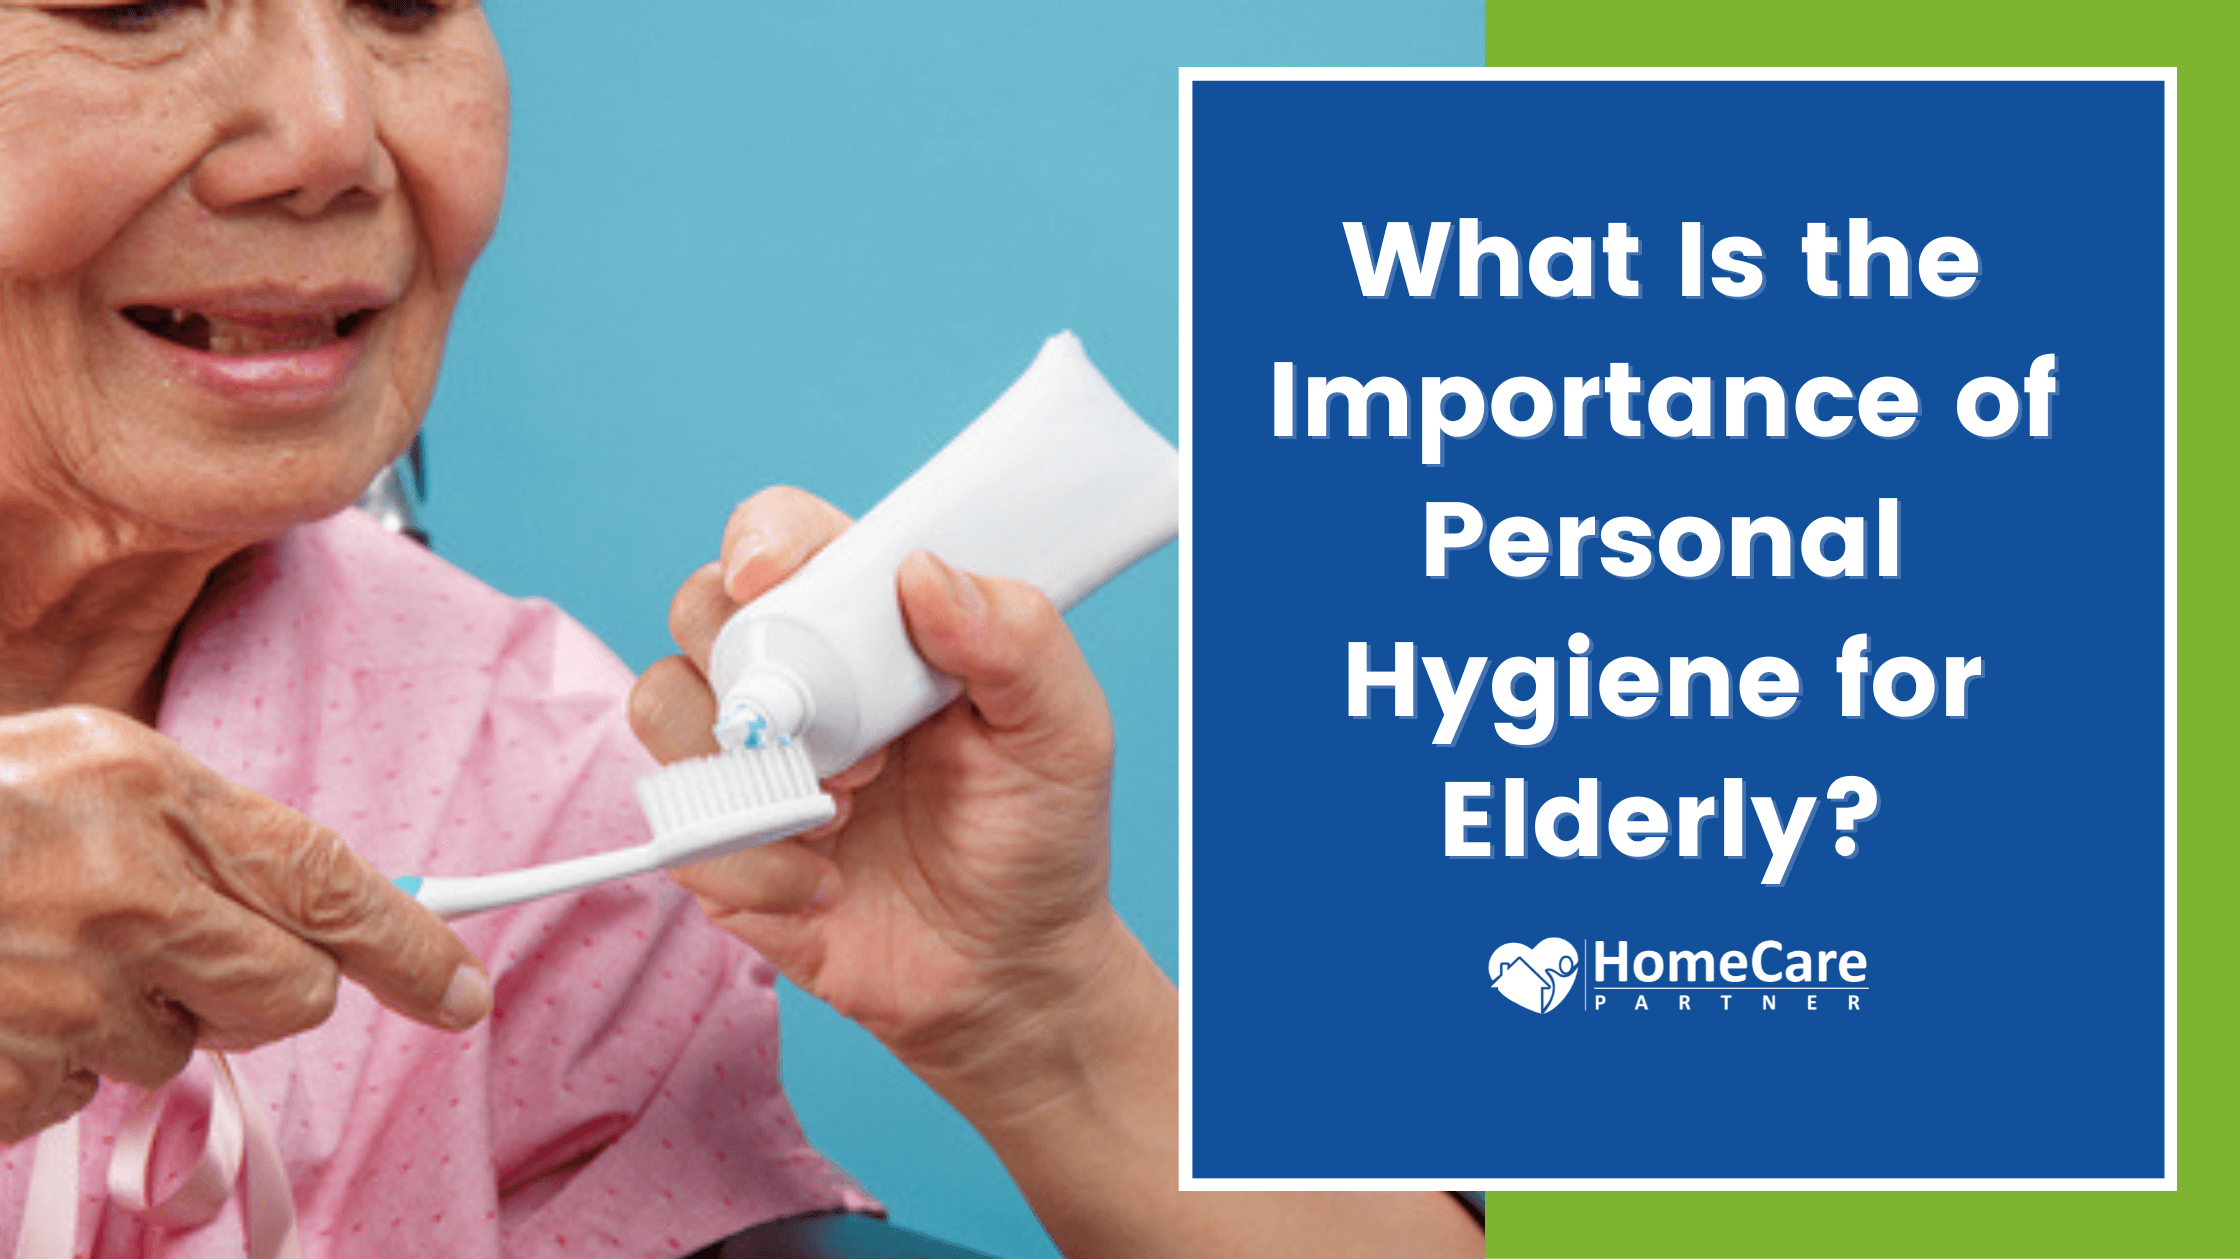 What Is the Importance of Personal Hygiene for Elderly?